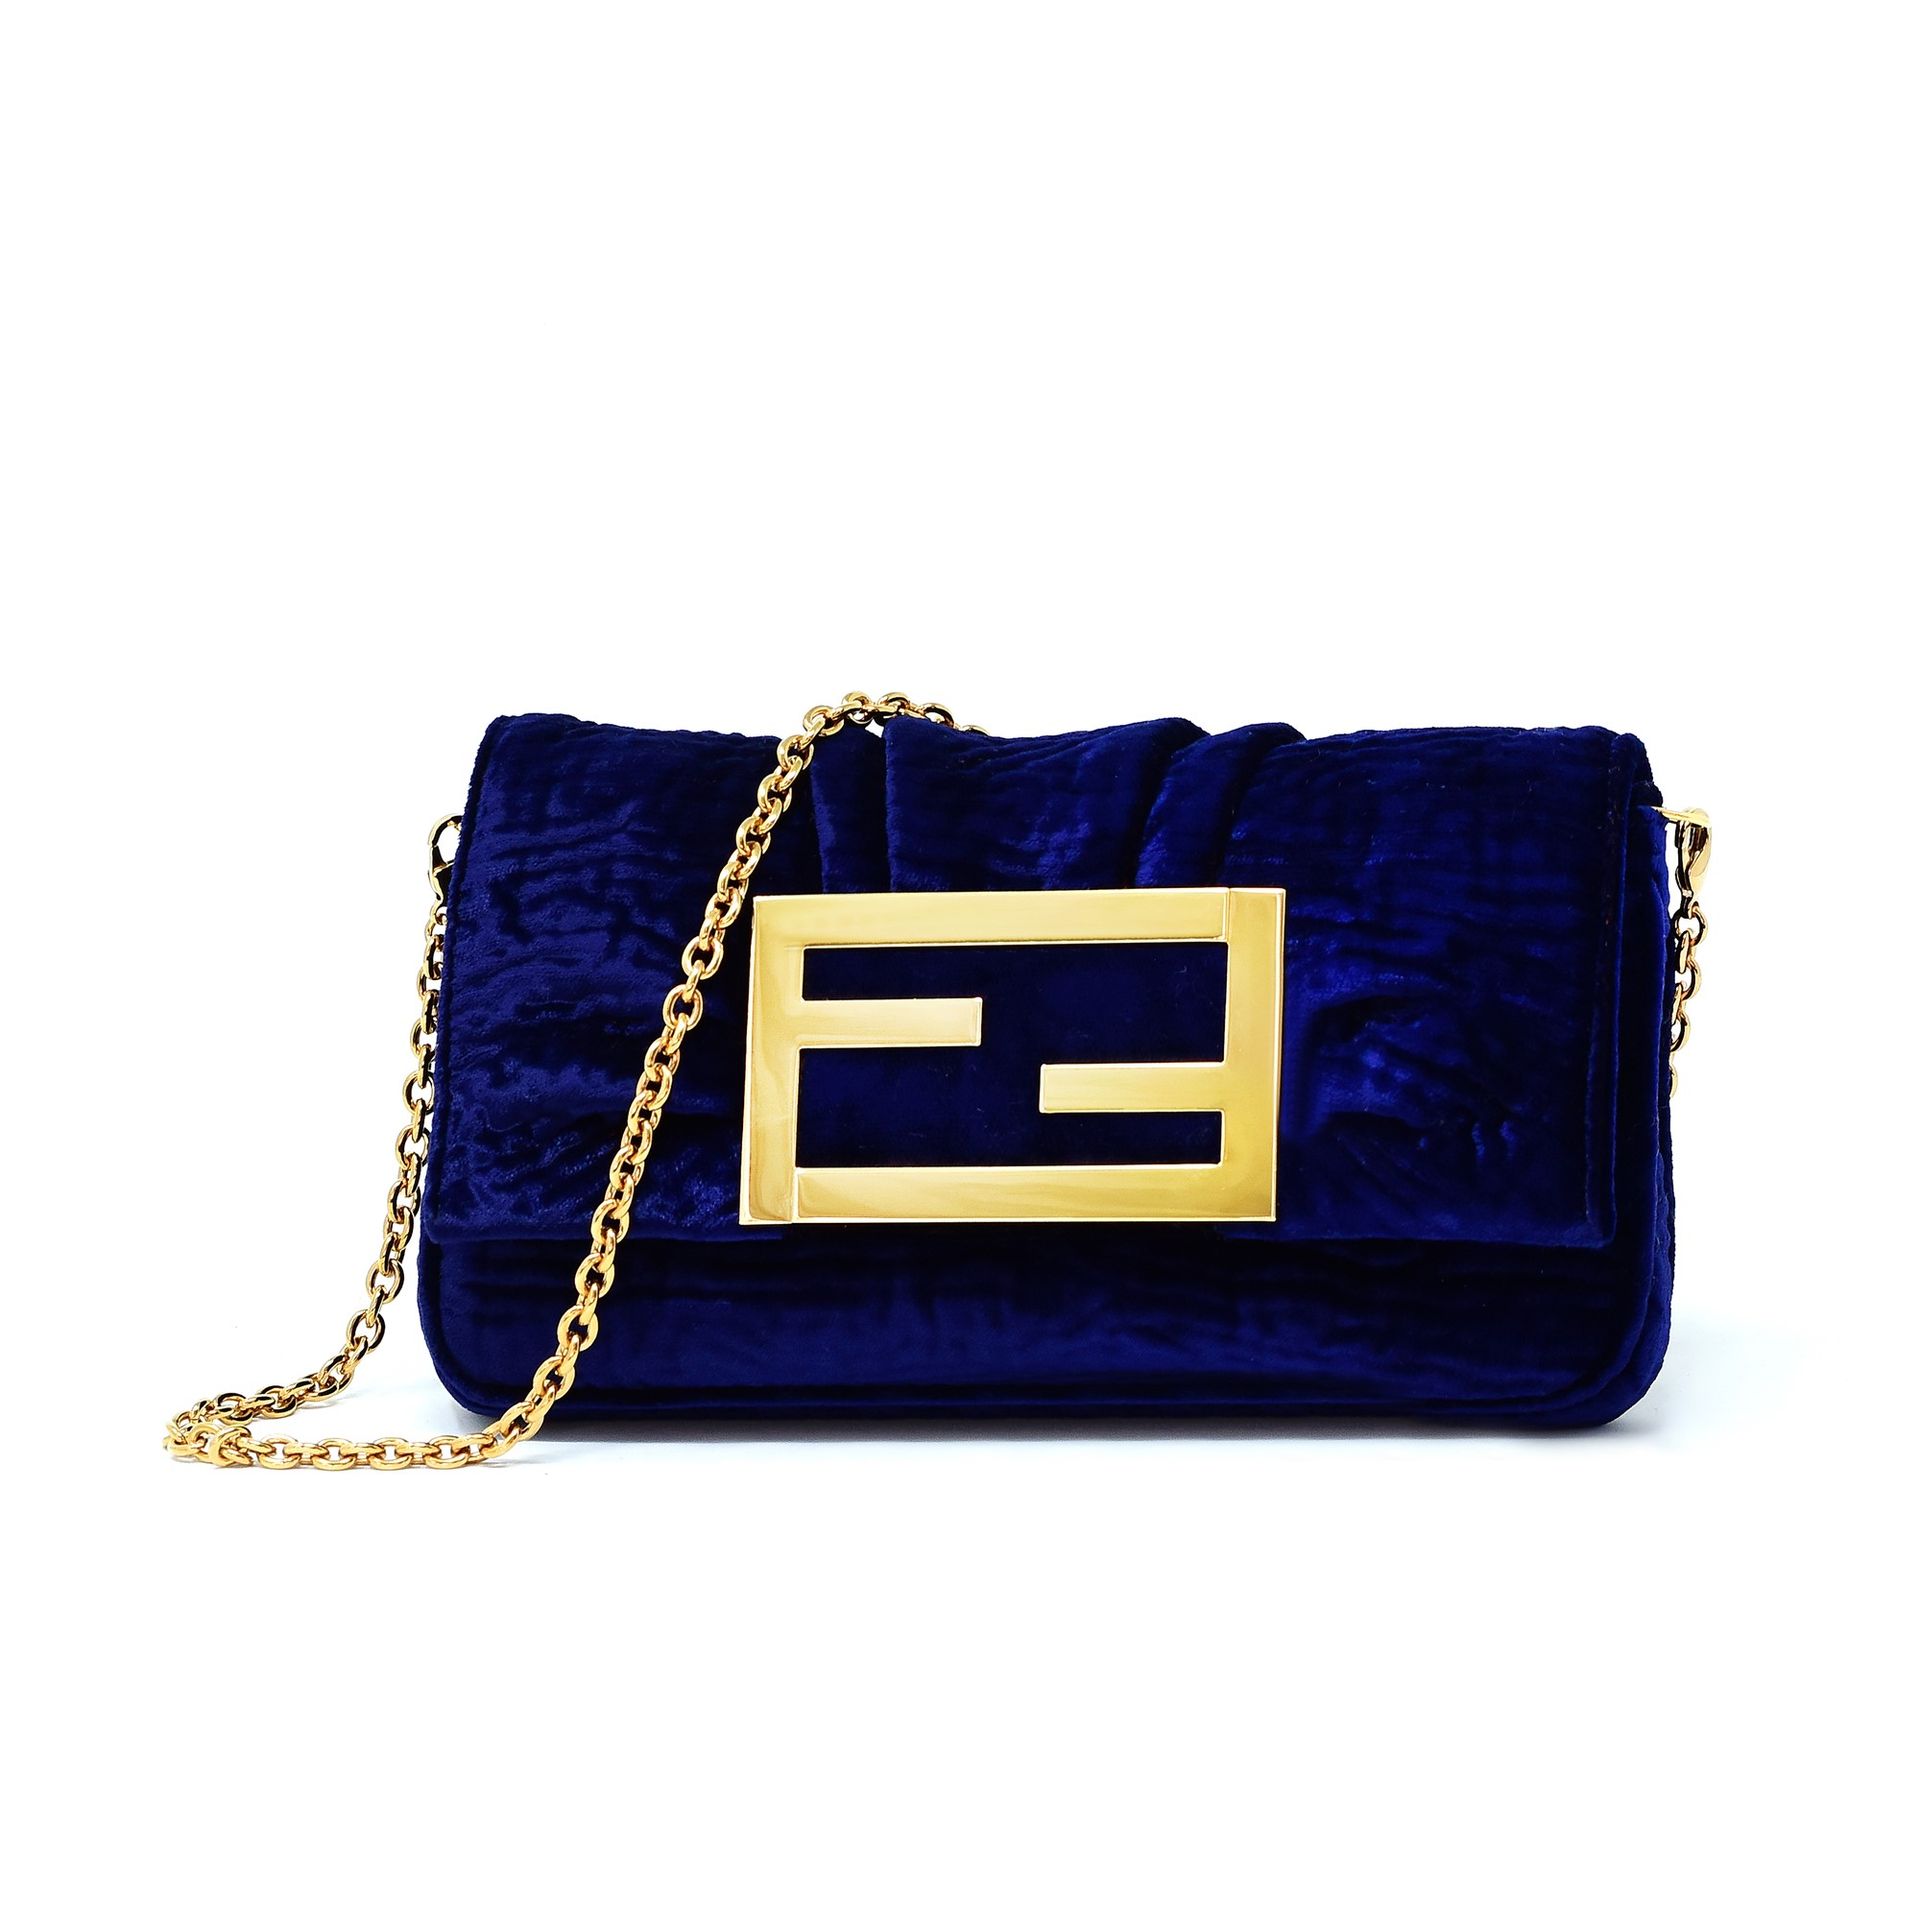 FENDI Midnight blue velvet Fendi clutch bag with gold metal front logo and butto&hellip;